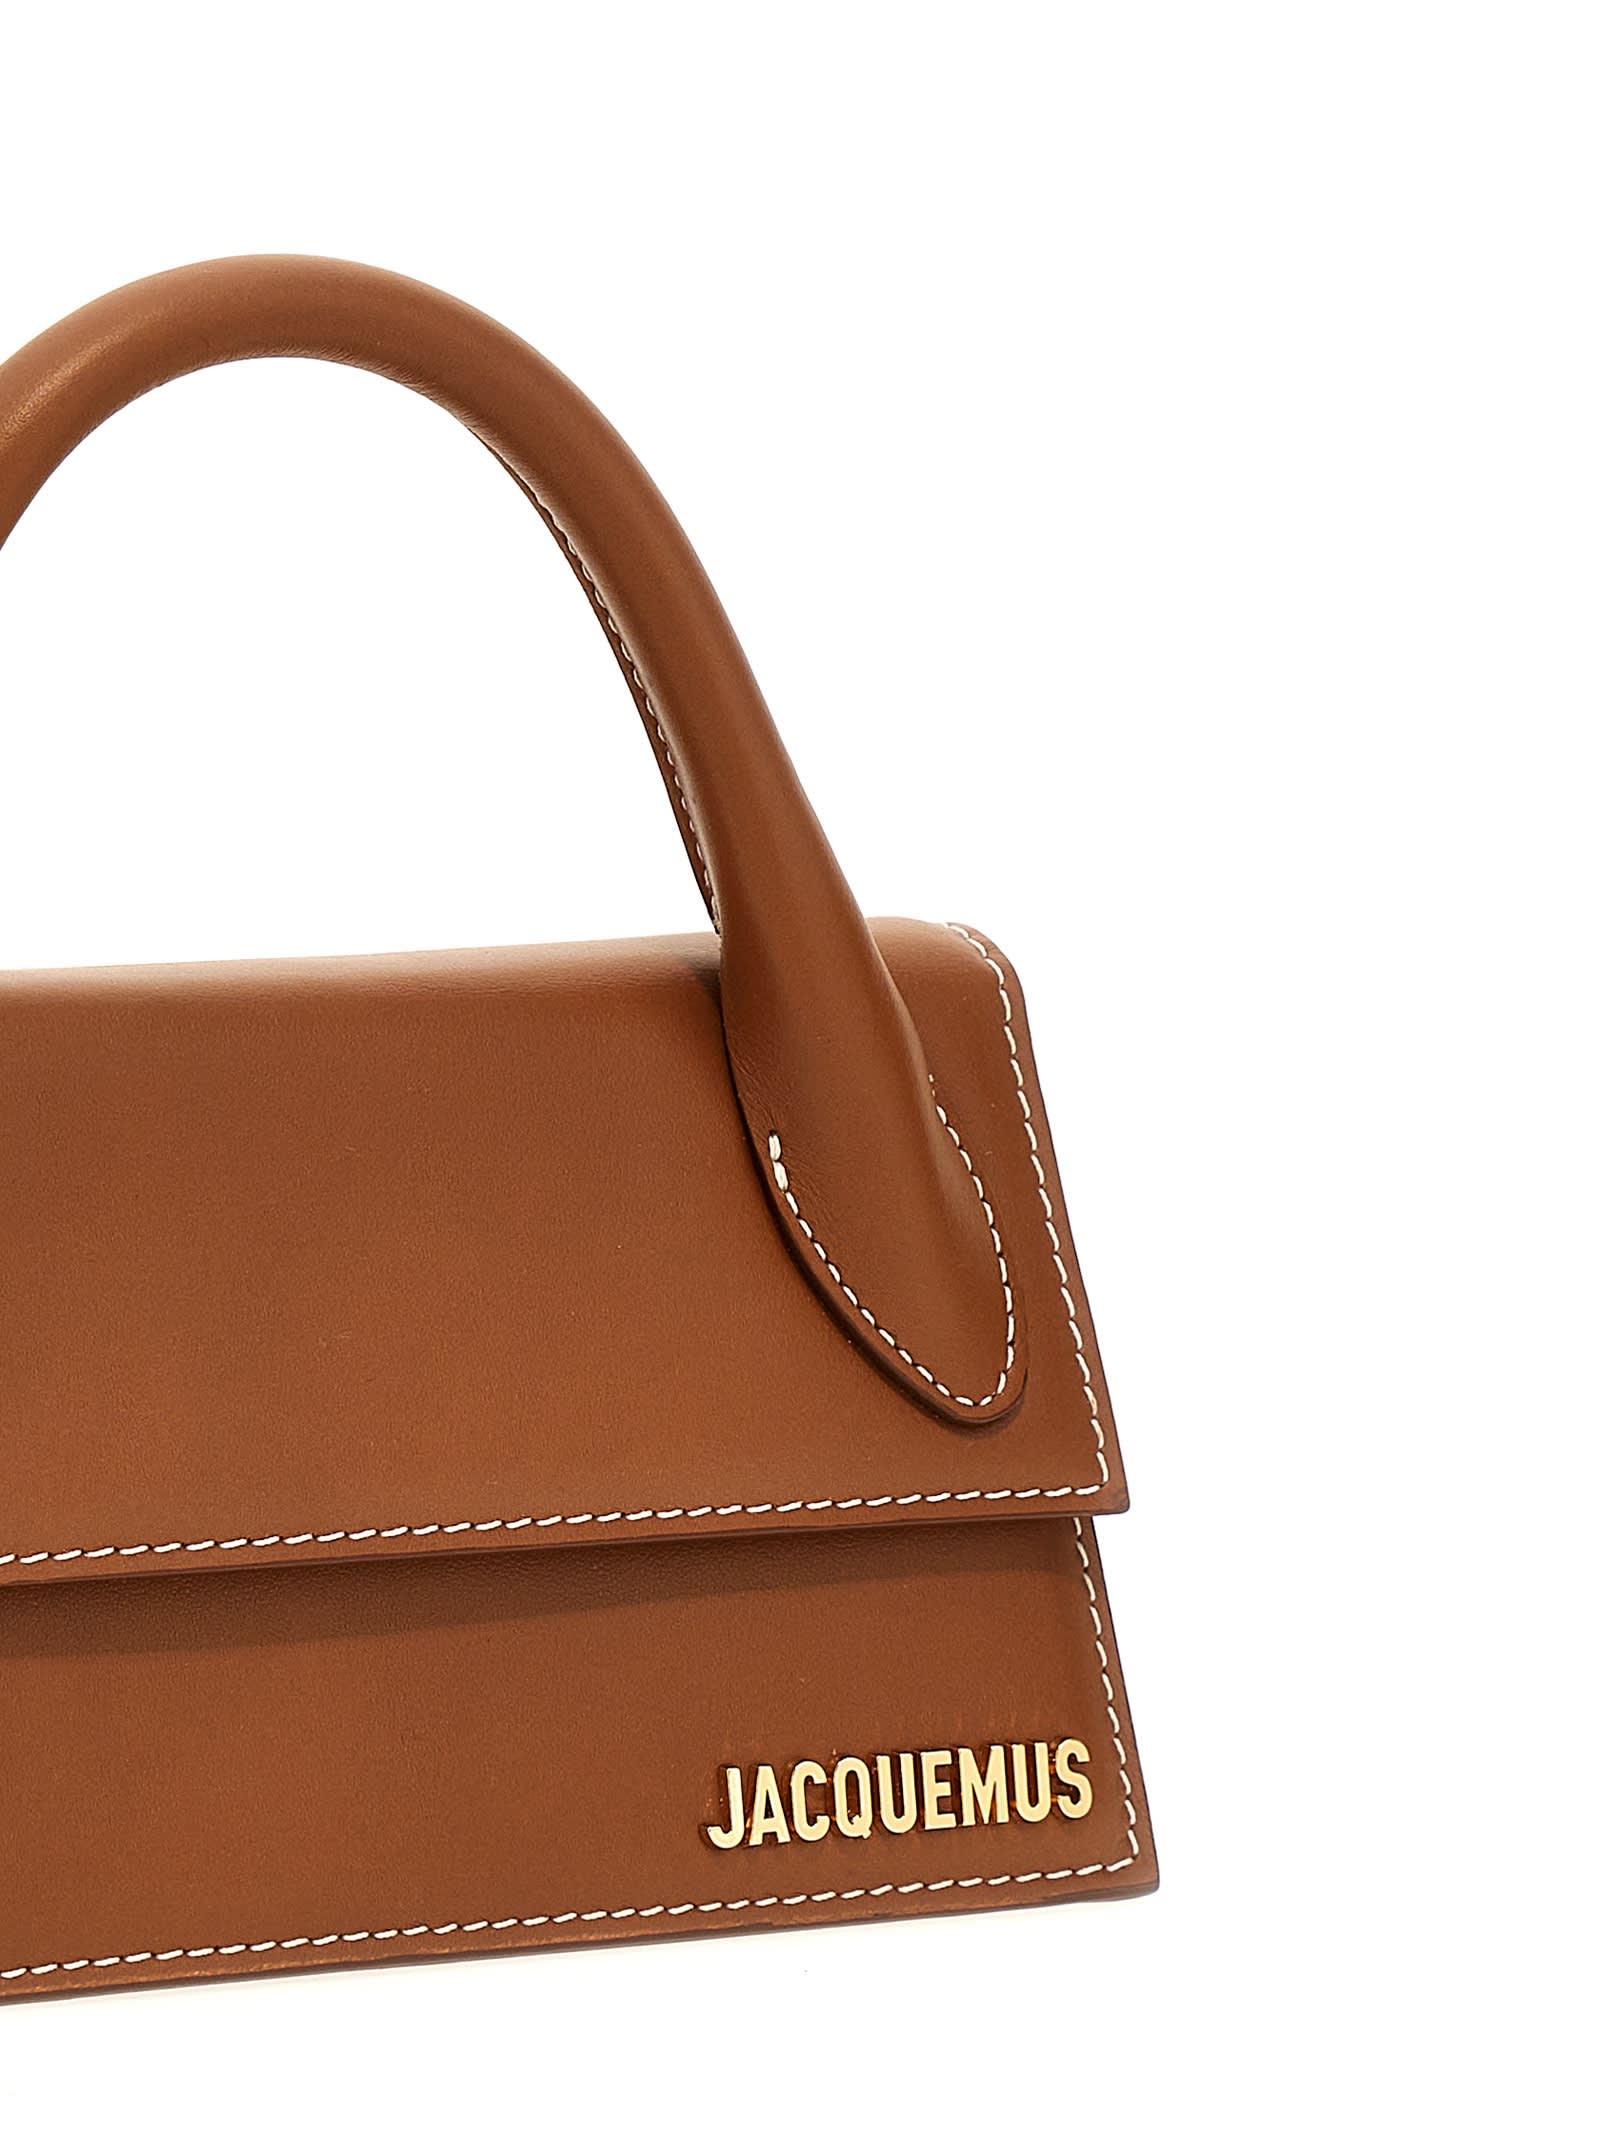 Jacquemus Le Chiquito Long Boucle Handbag in Brown | Lyst